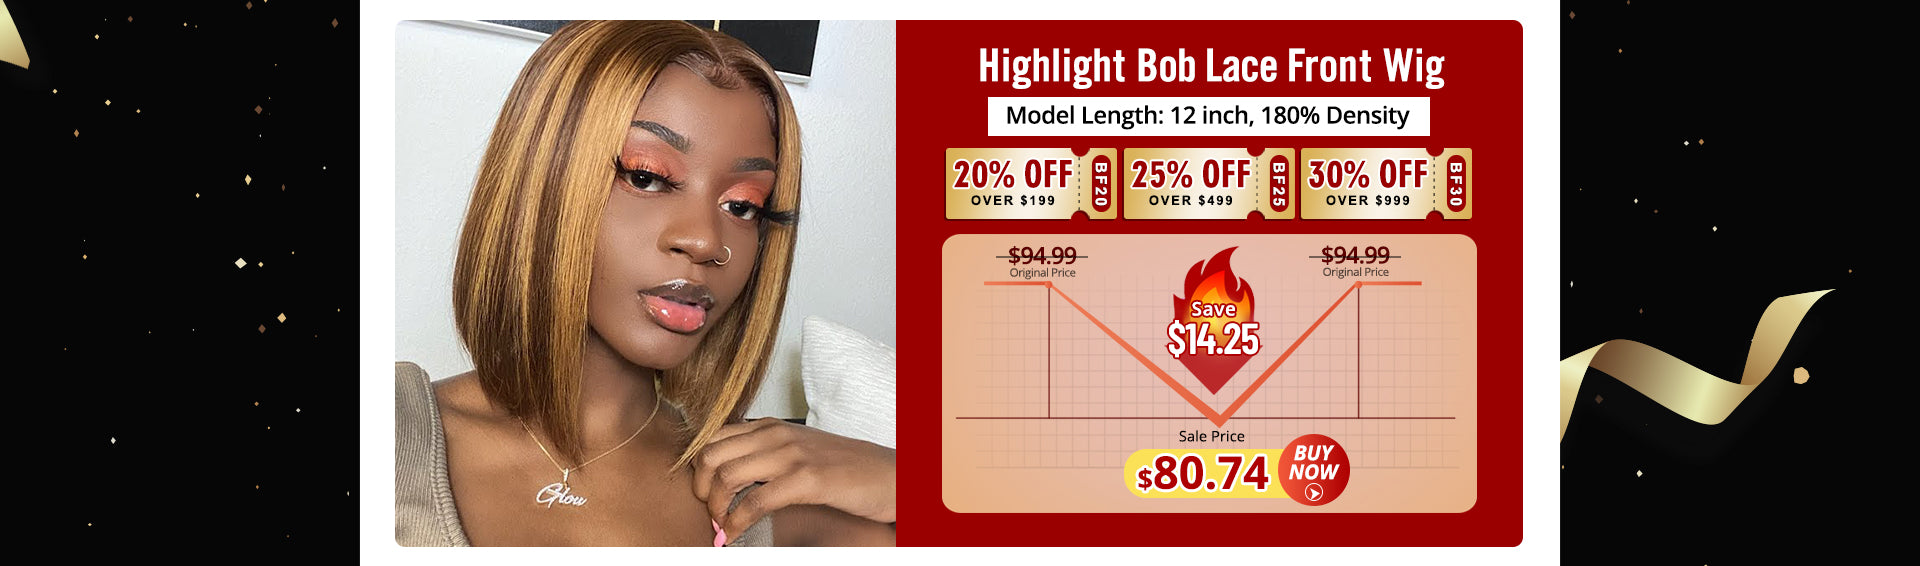 Highlight Bob Lace Front Wigs